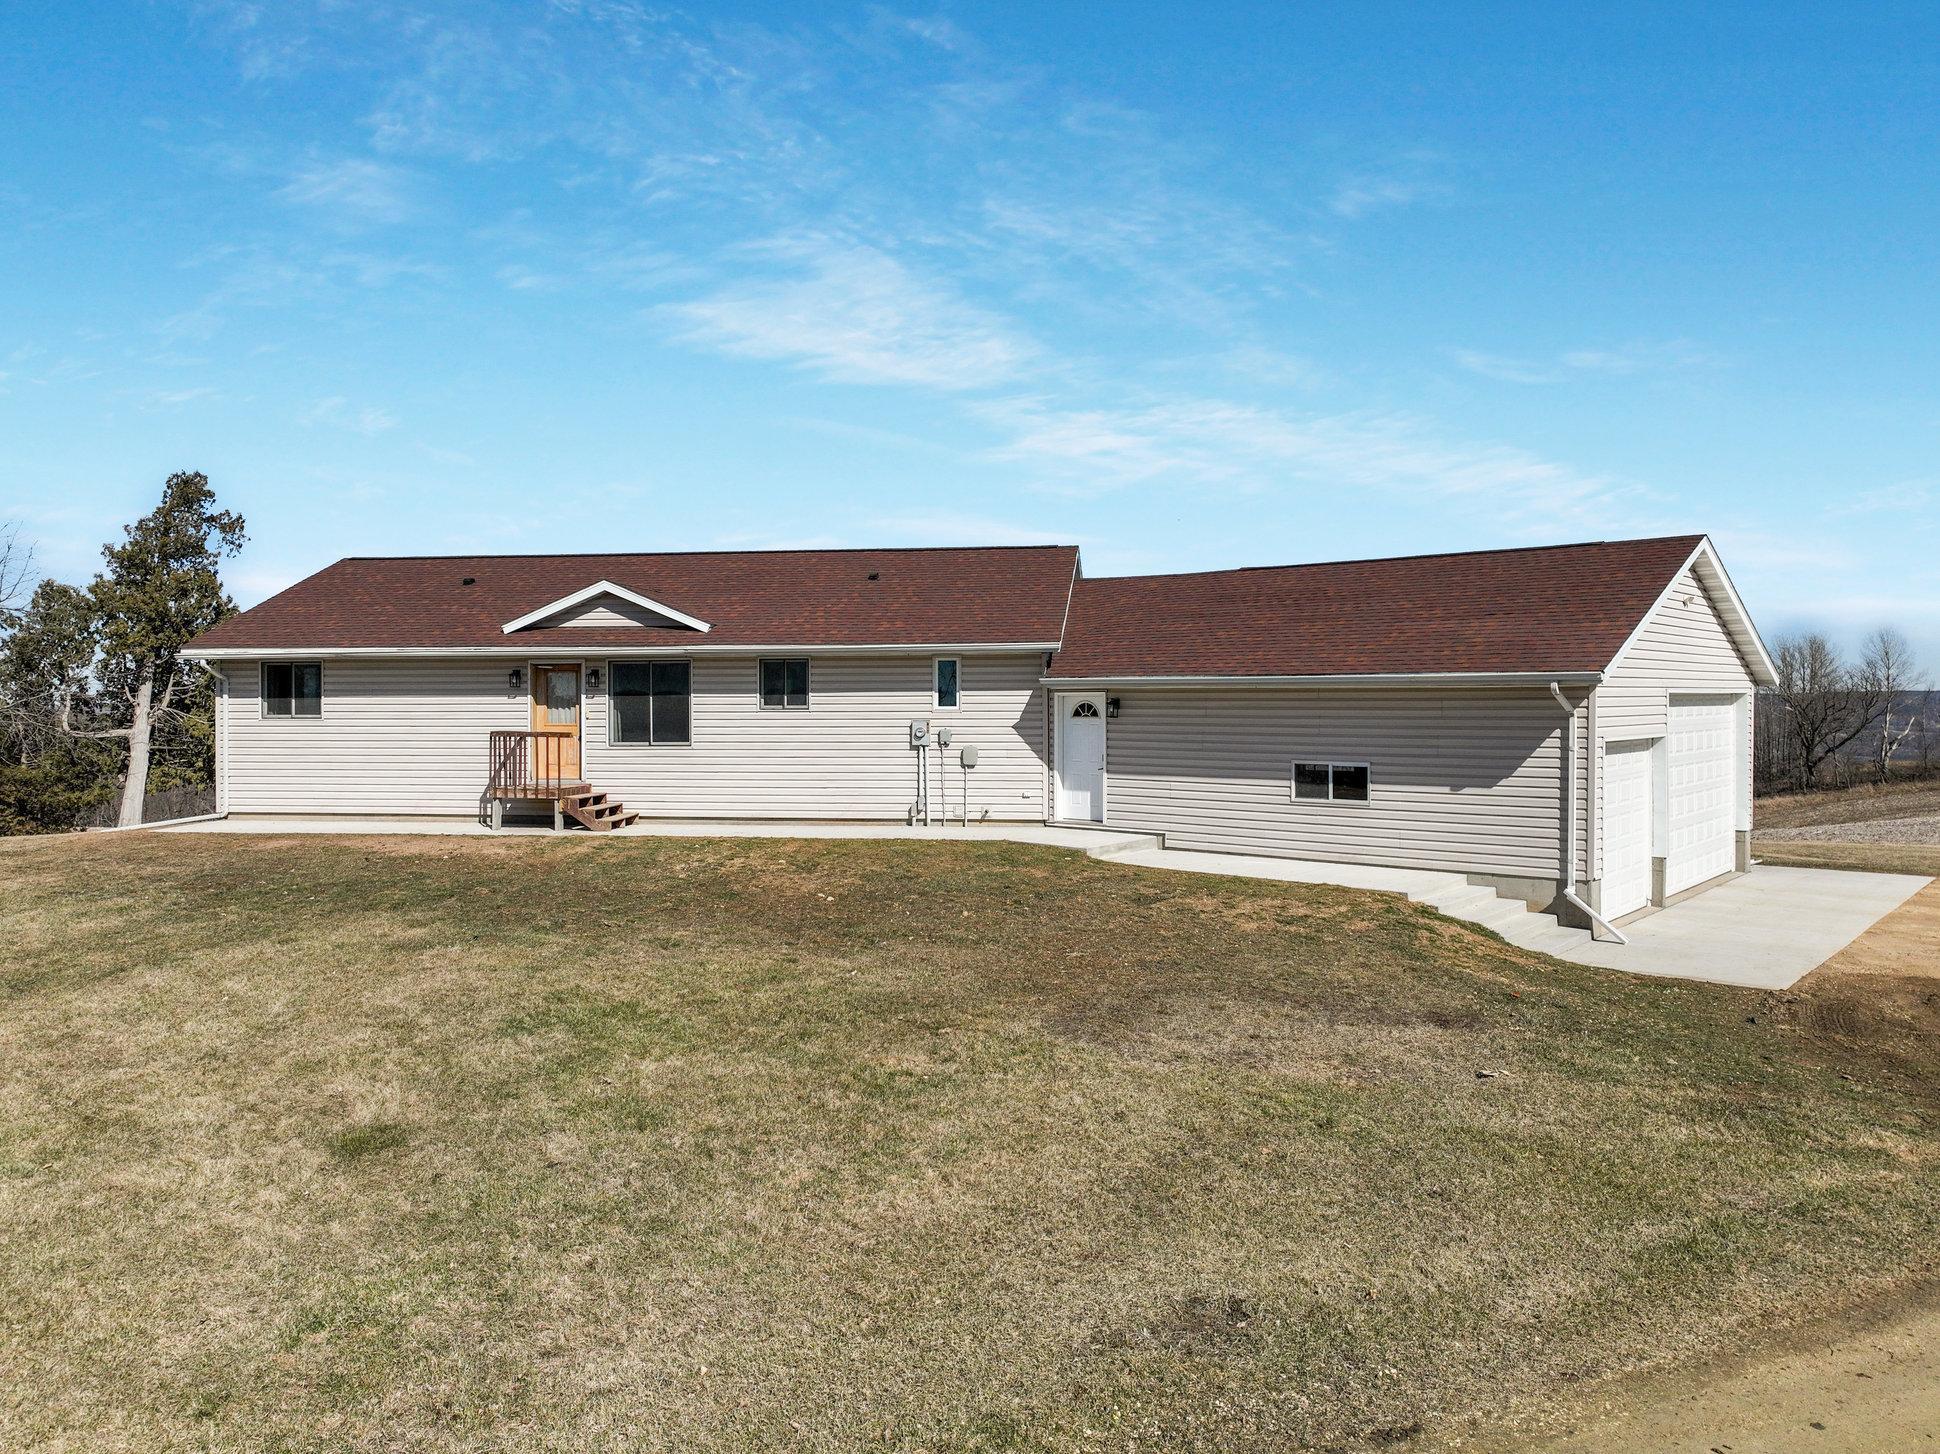 N4542 County Road D, Arkansaw, WI 54721